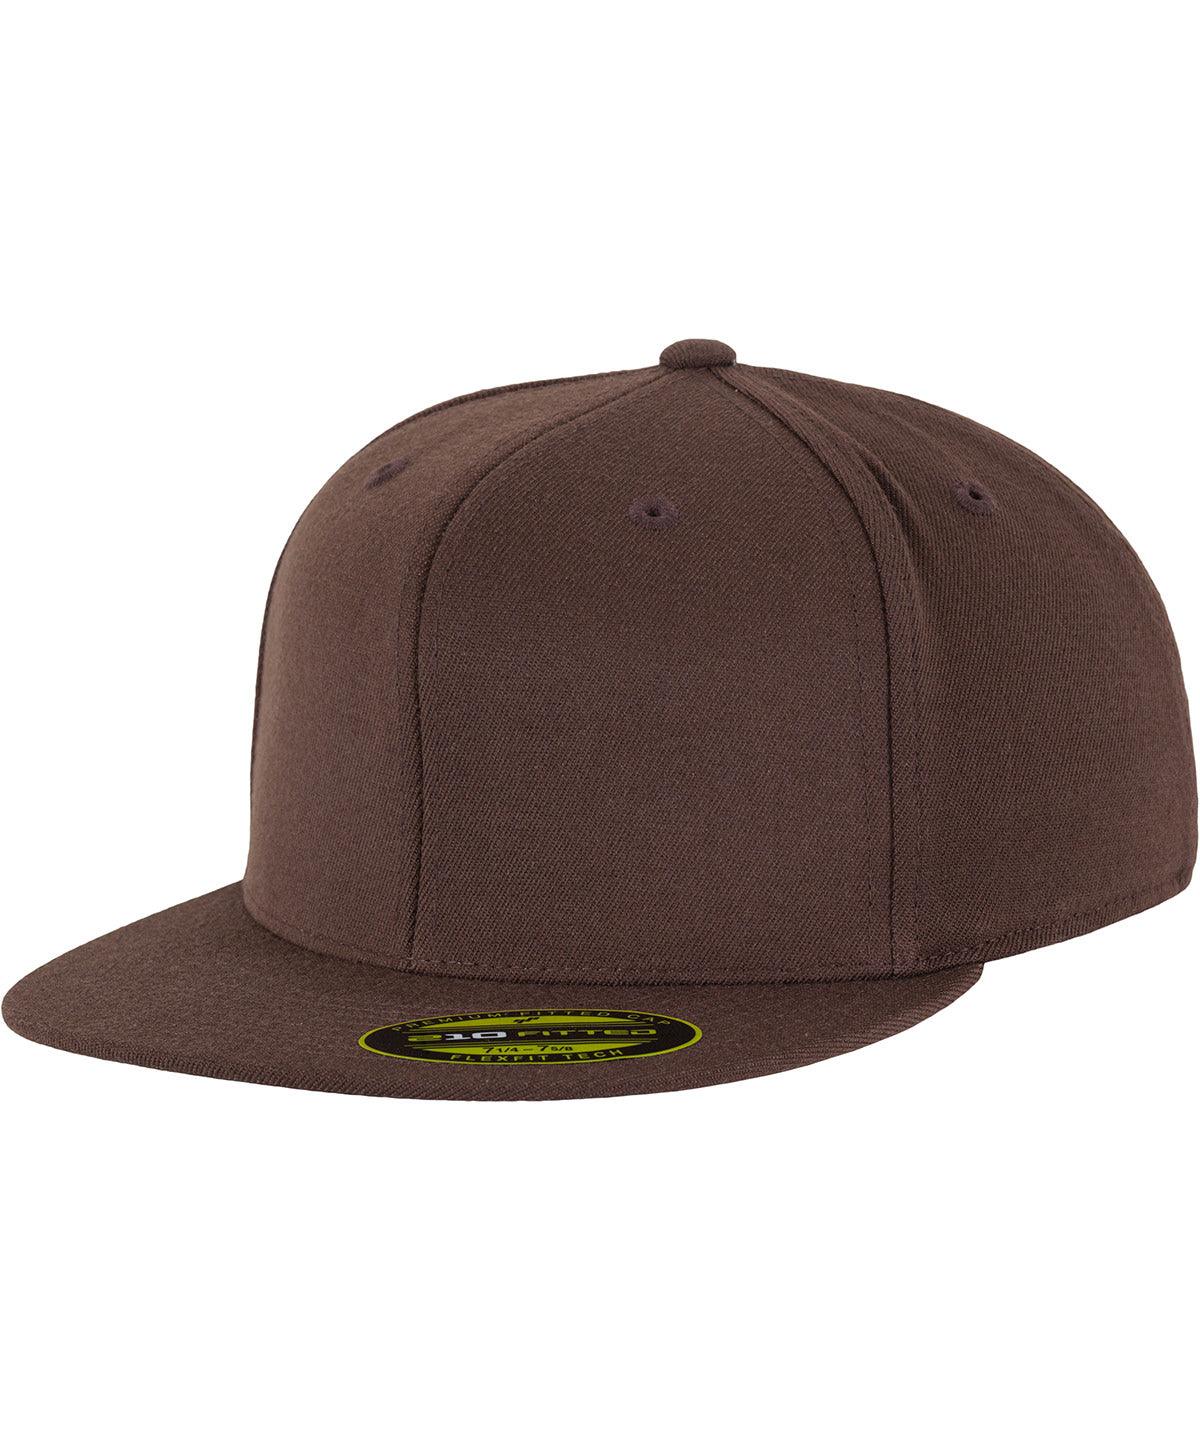 Brown - Premium 210 fitted cap (6210) Caps Flexfit by Yupoong Headwear, New Colours for 2023, Rebrandable, Sports & Leisure Schoolwear Centres